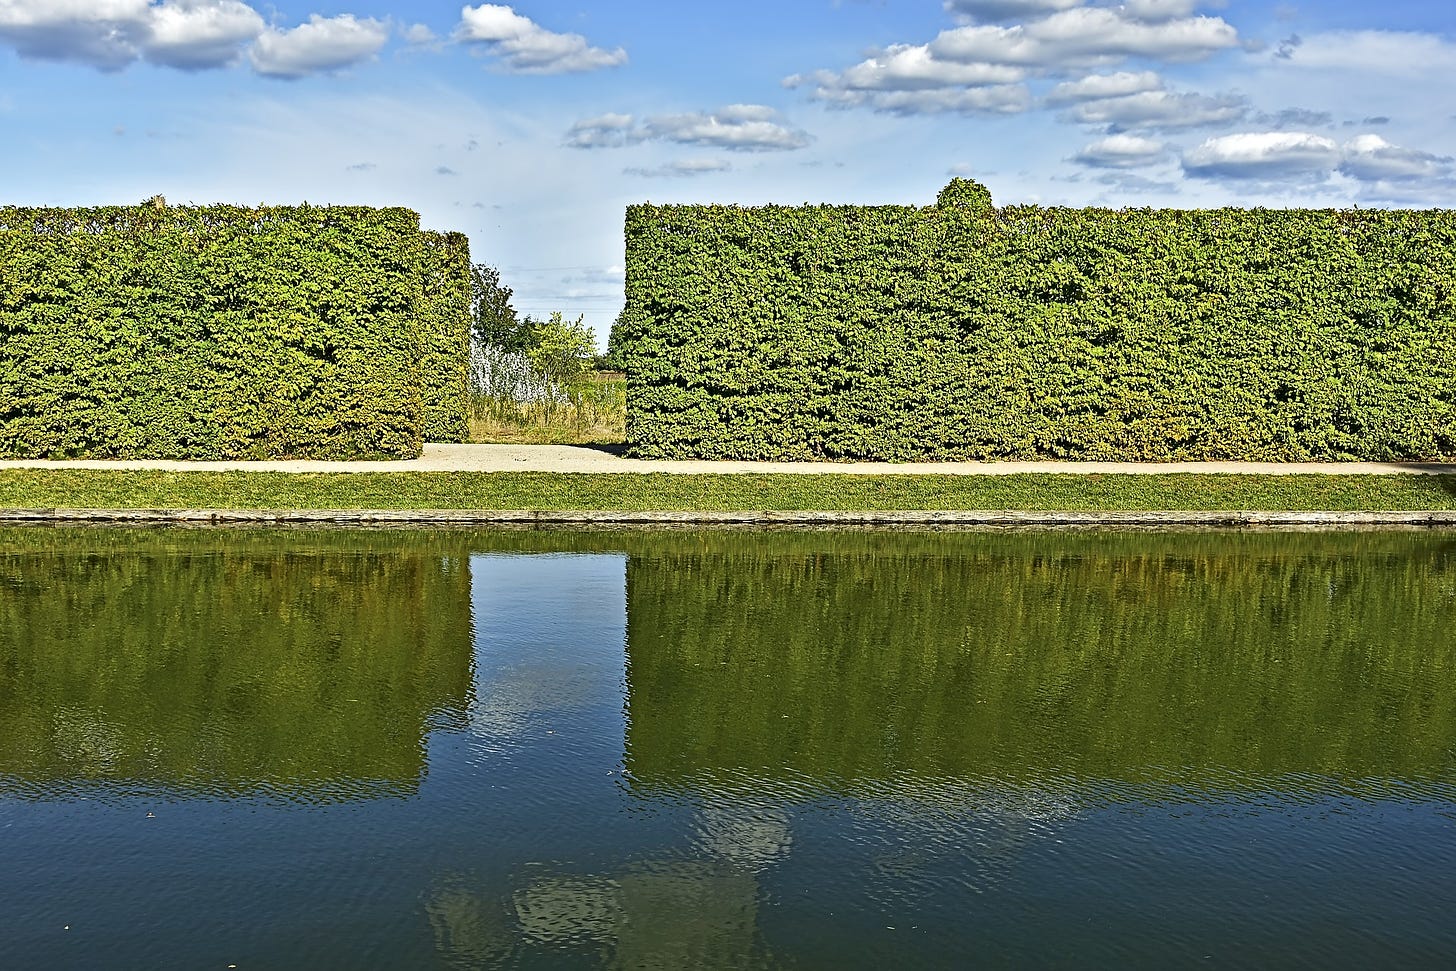 Tall hedges in front of a body of water